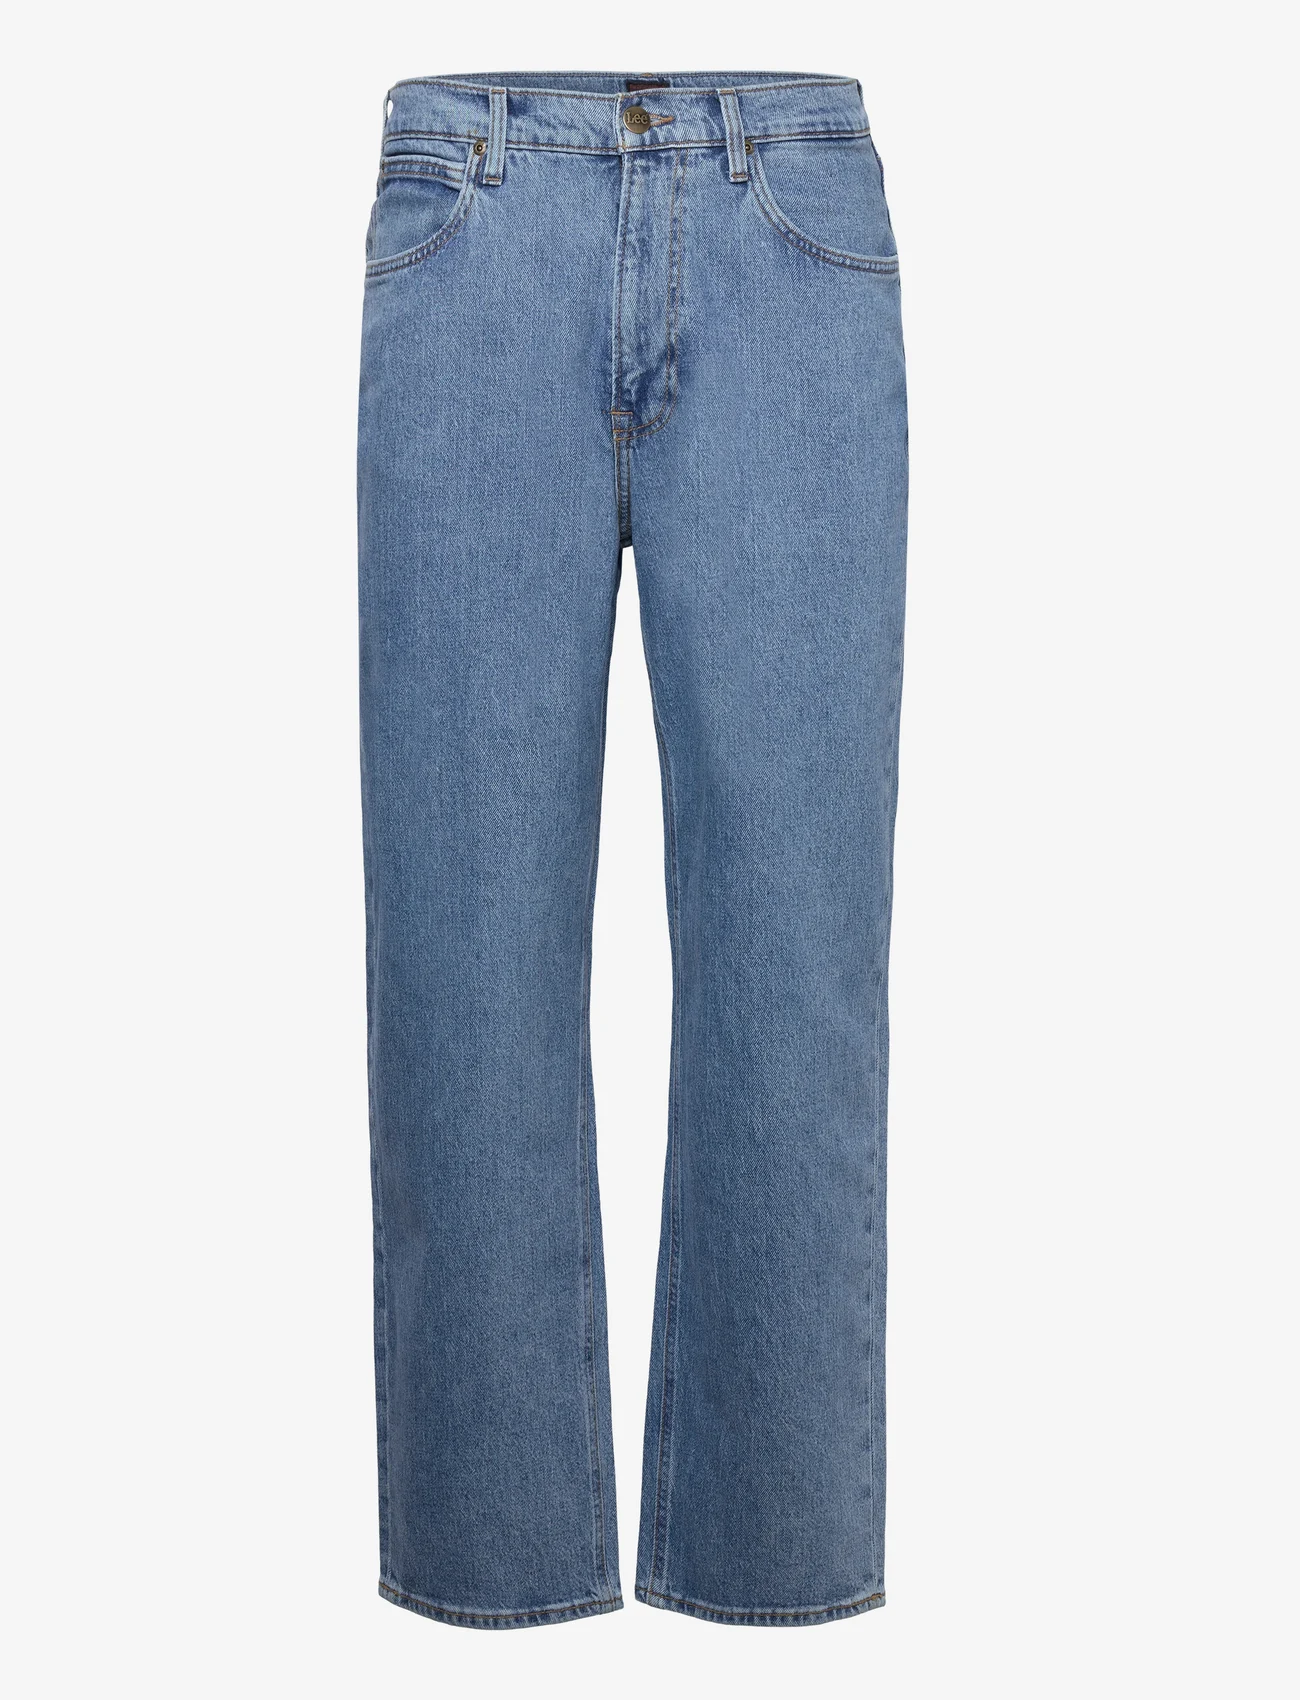 Lee Jeans - ASHER - relaxed jeans - badlands - 0